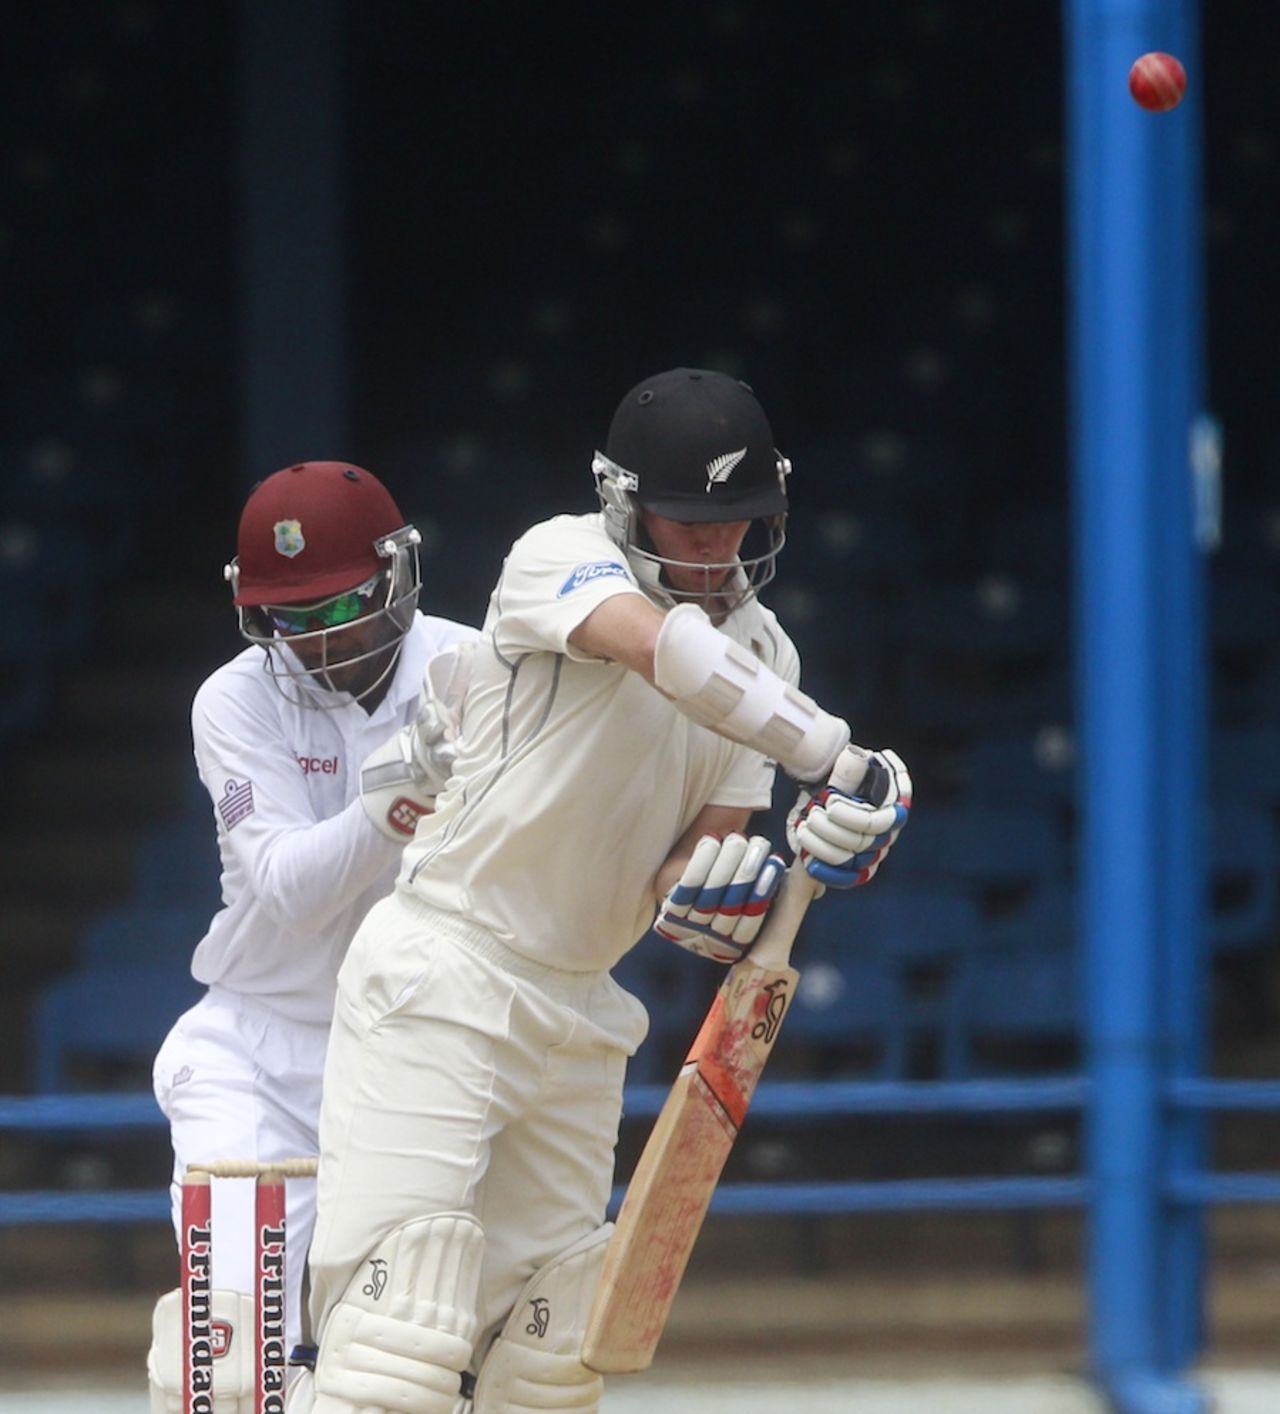 Tom Latham was caught off a delivery that bounced sharply, West Indies v New Zealand, 2nd Test, Trinidad, 4th day, June 19, 2014